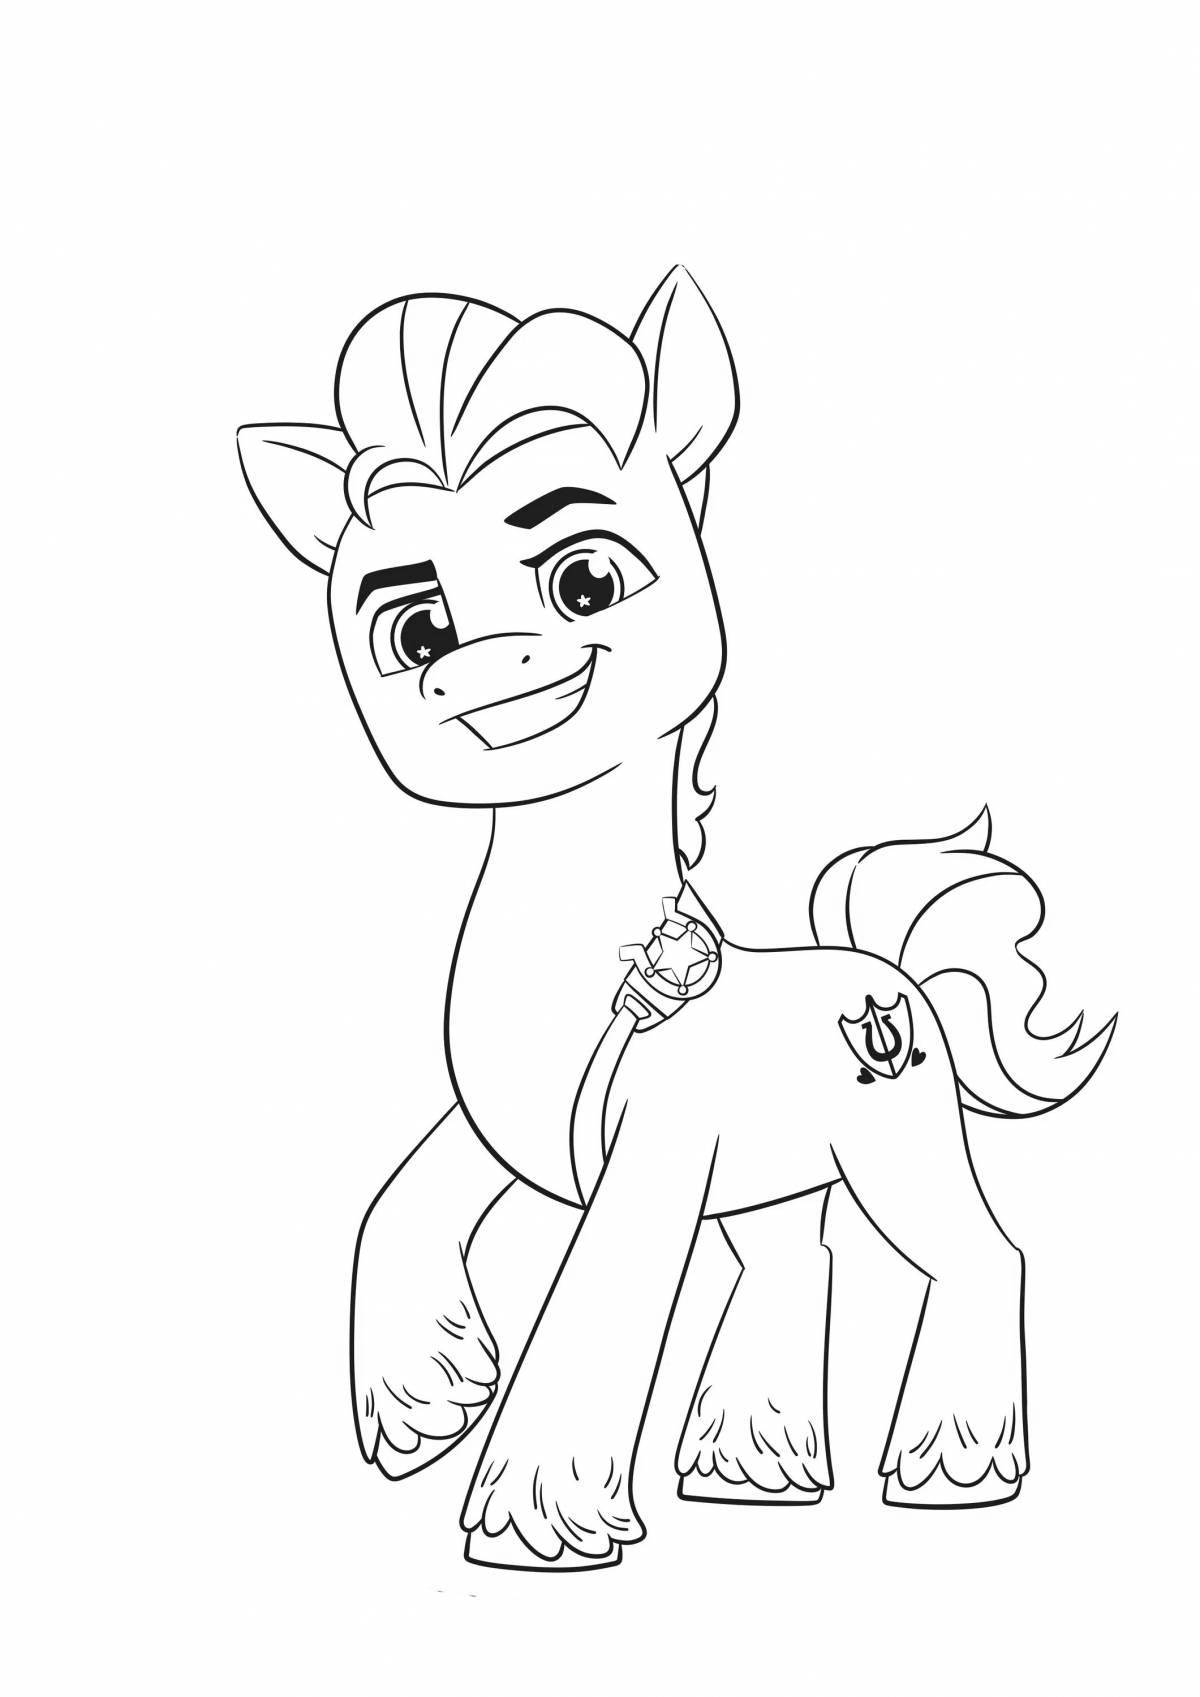 Adorable pony izzy coloring page